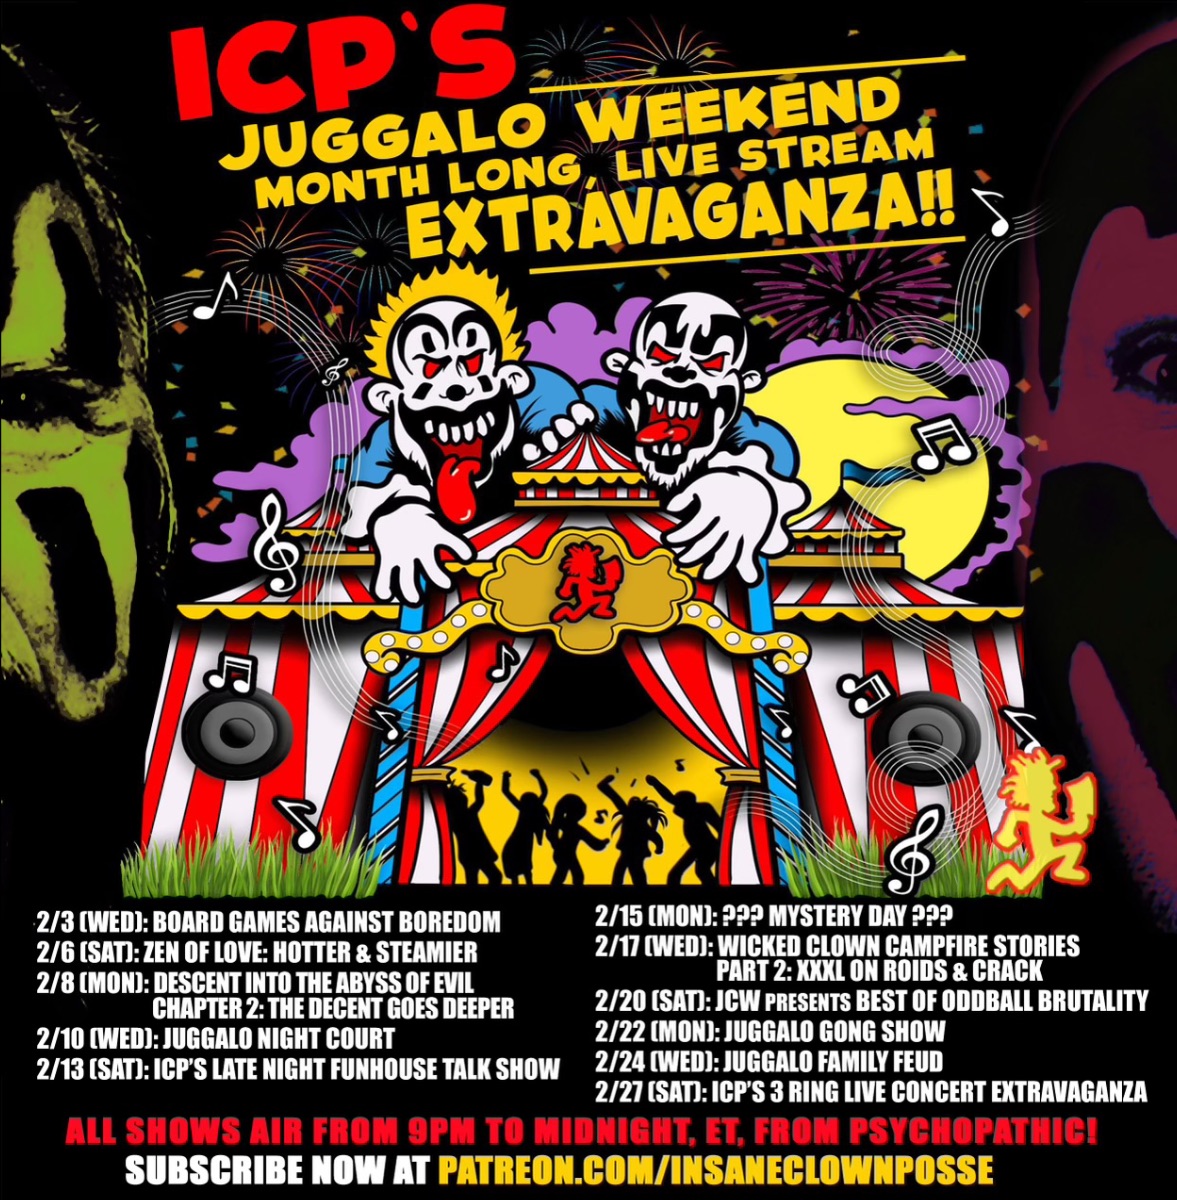 ICP's Streaming Calendar Means You Now Have Plans For The Rest of February